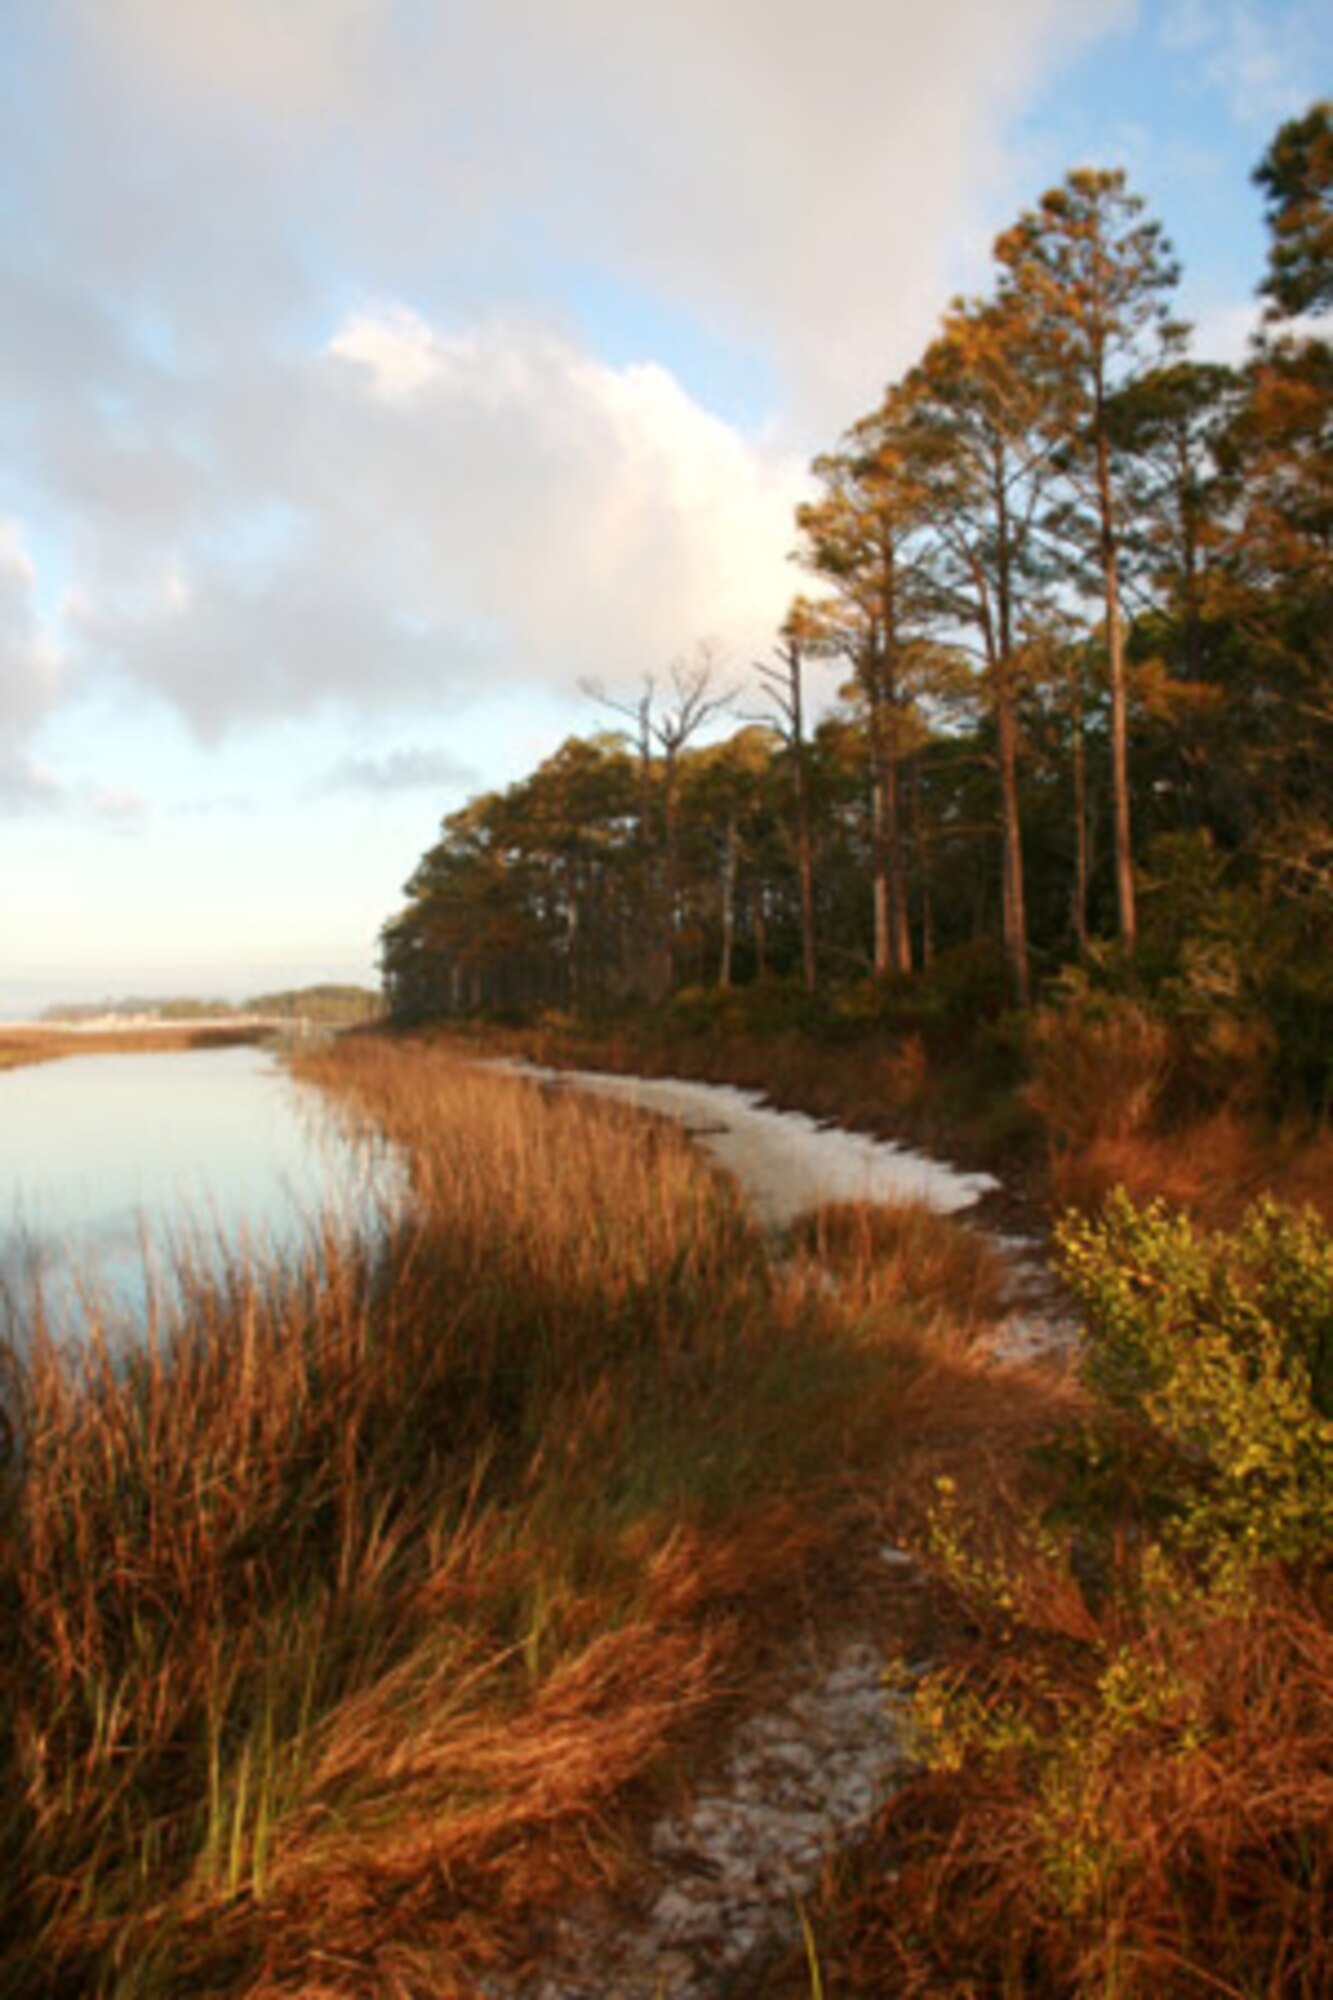 Future development changes to military housing will not affect the protected wetland areas or salt marshes along the Hurlburt Field Soundside. Salt marshes are coastal wetlands that are flooded and drained by salt water brought in by the tides.(Courtesy photo)